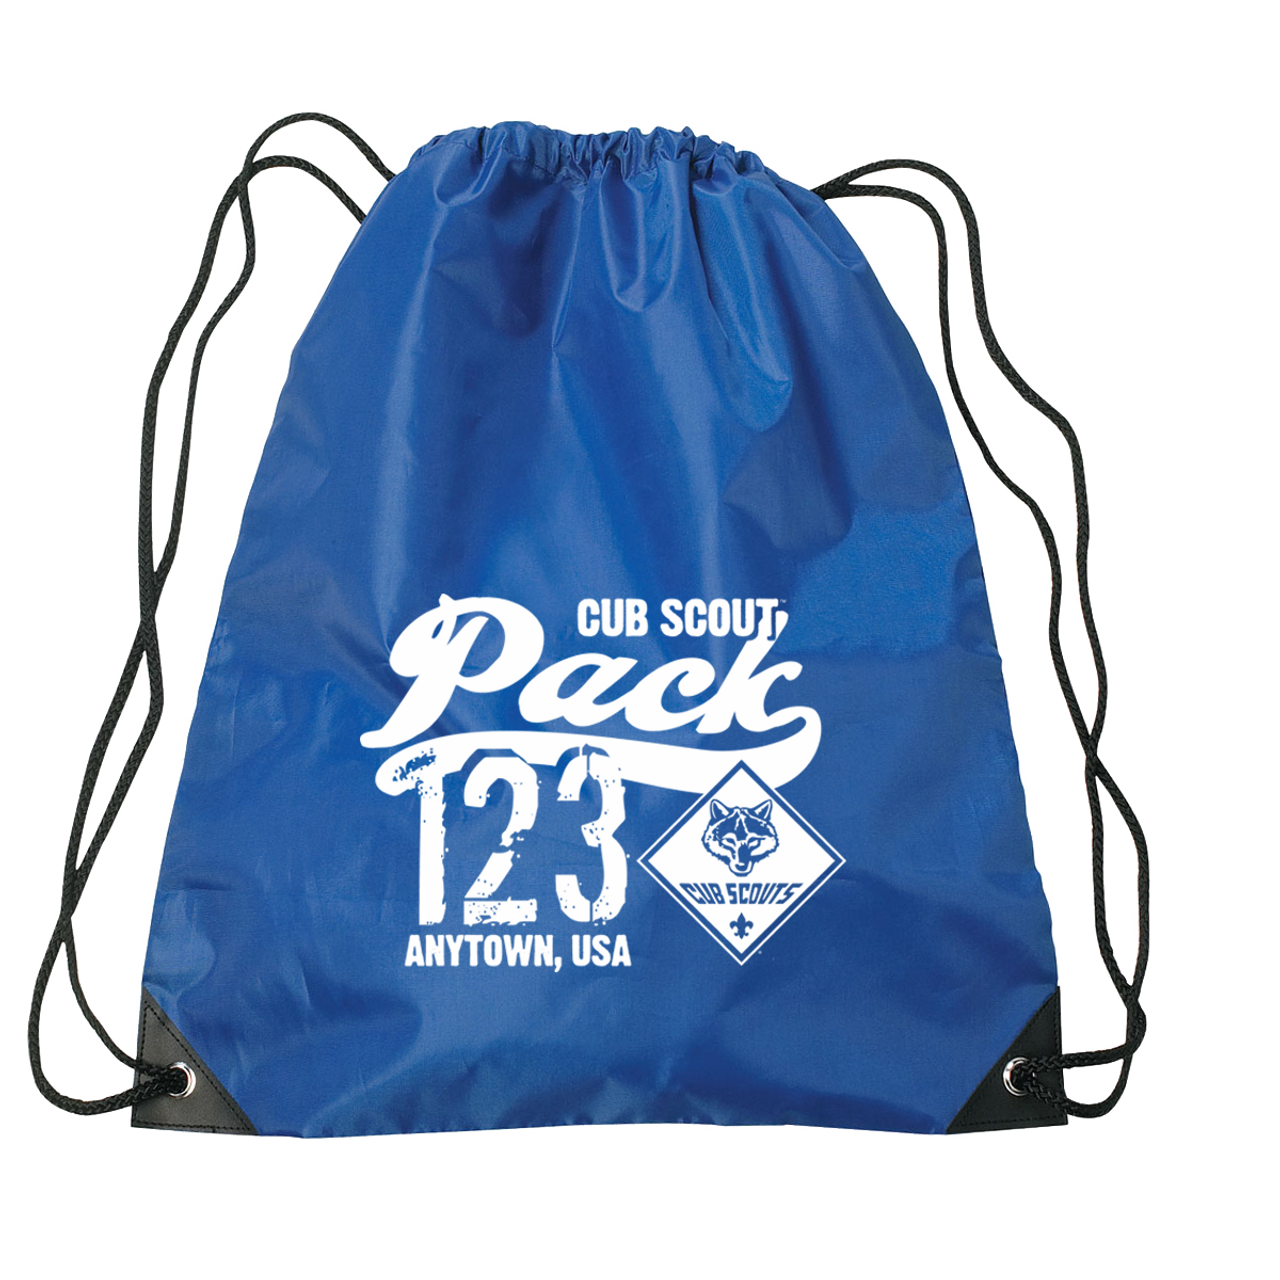 Drawstring bags with custom scout design  150 pcs  only 247 each